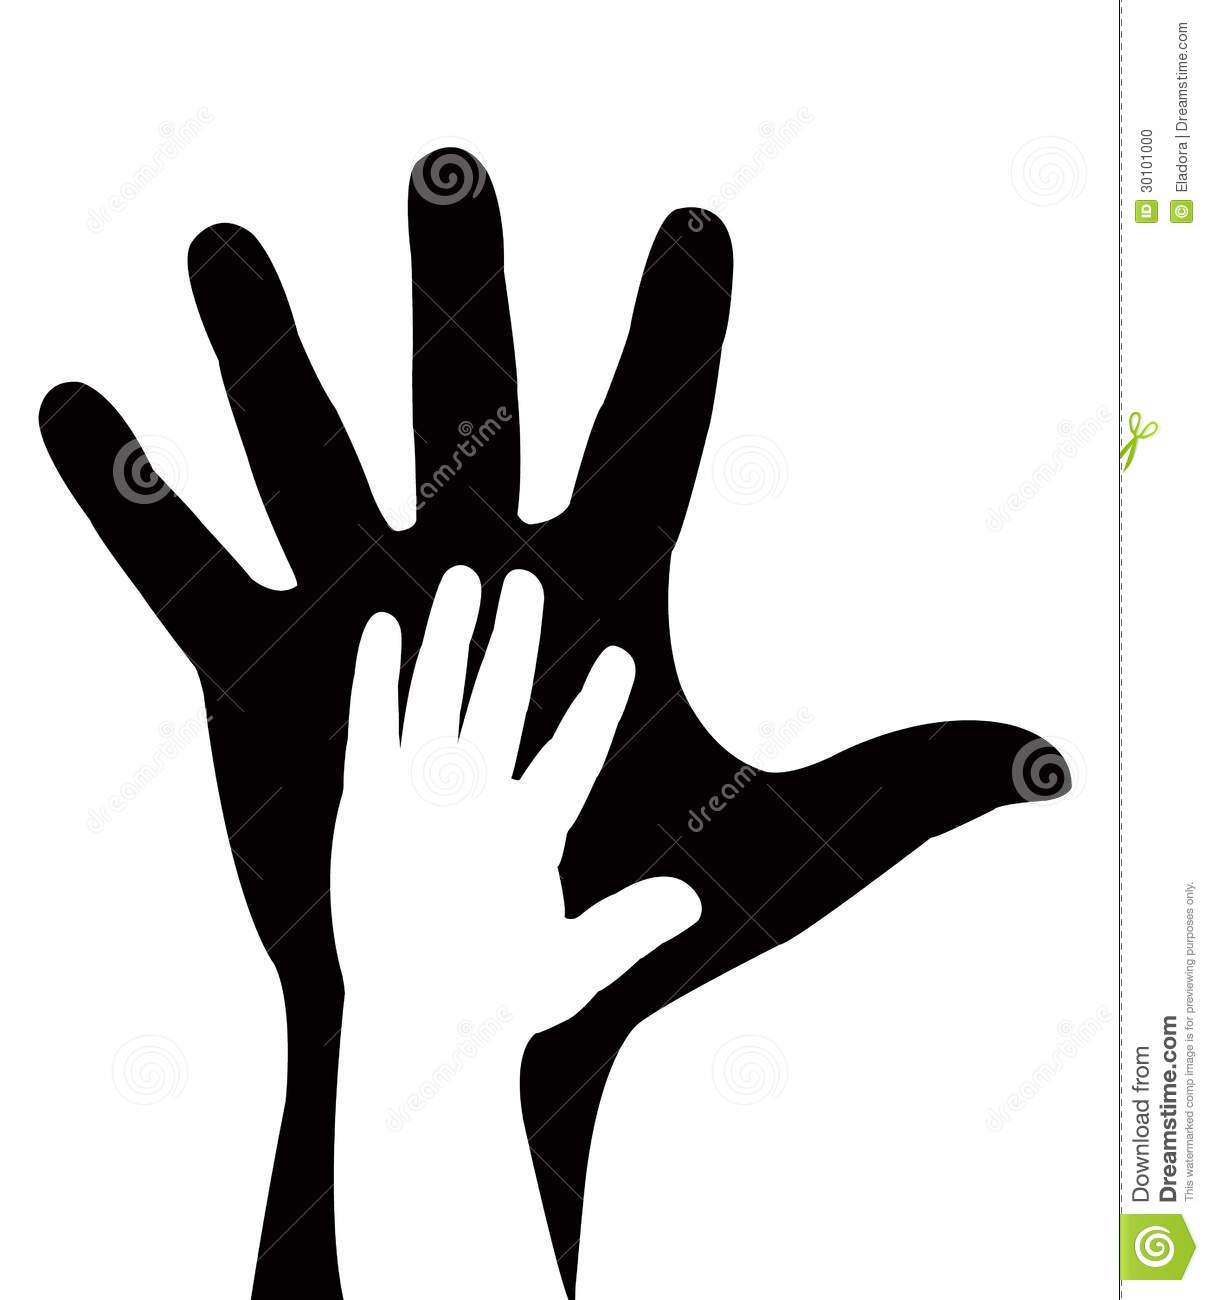 Holding Hands Silhouette Vector